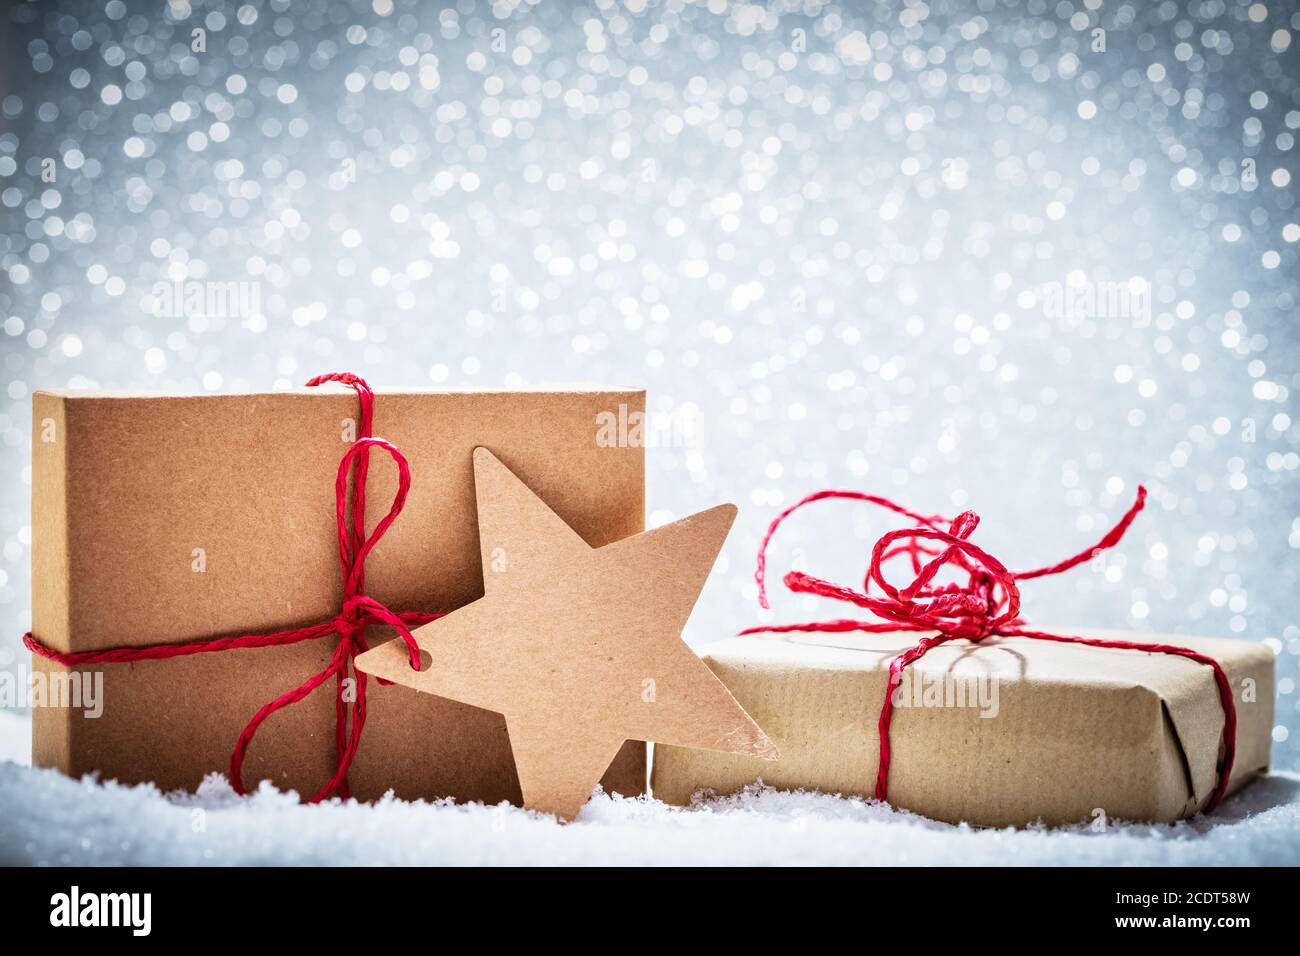 Retro rustic Christmas gifts, presents in snow on glitter background Stock Photo